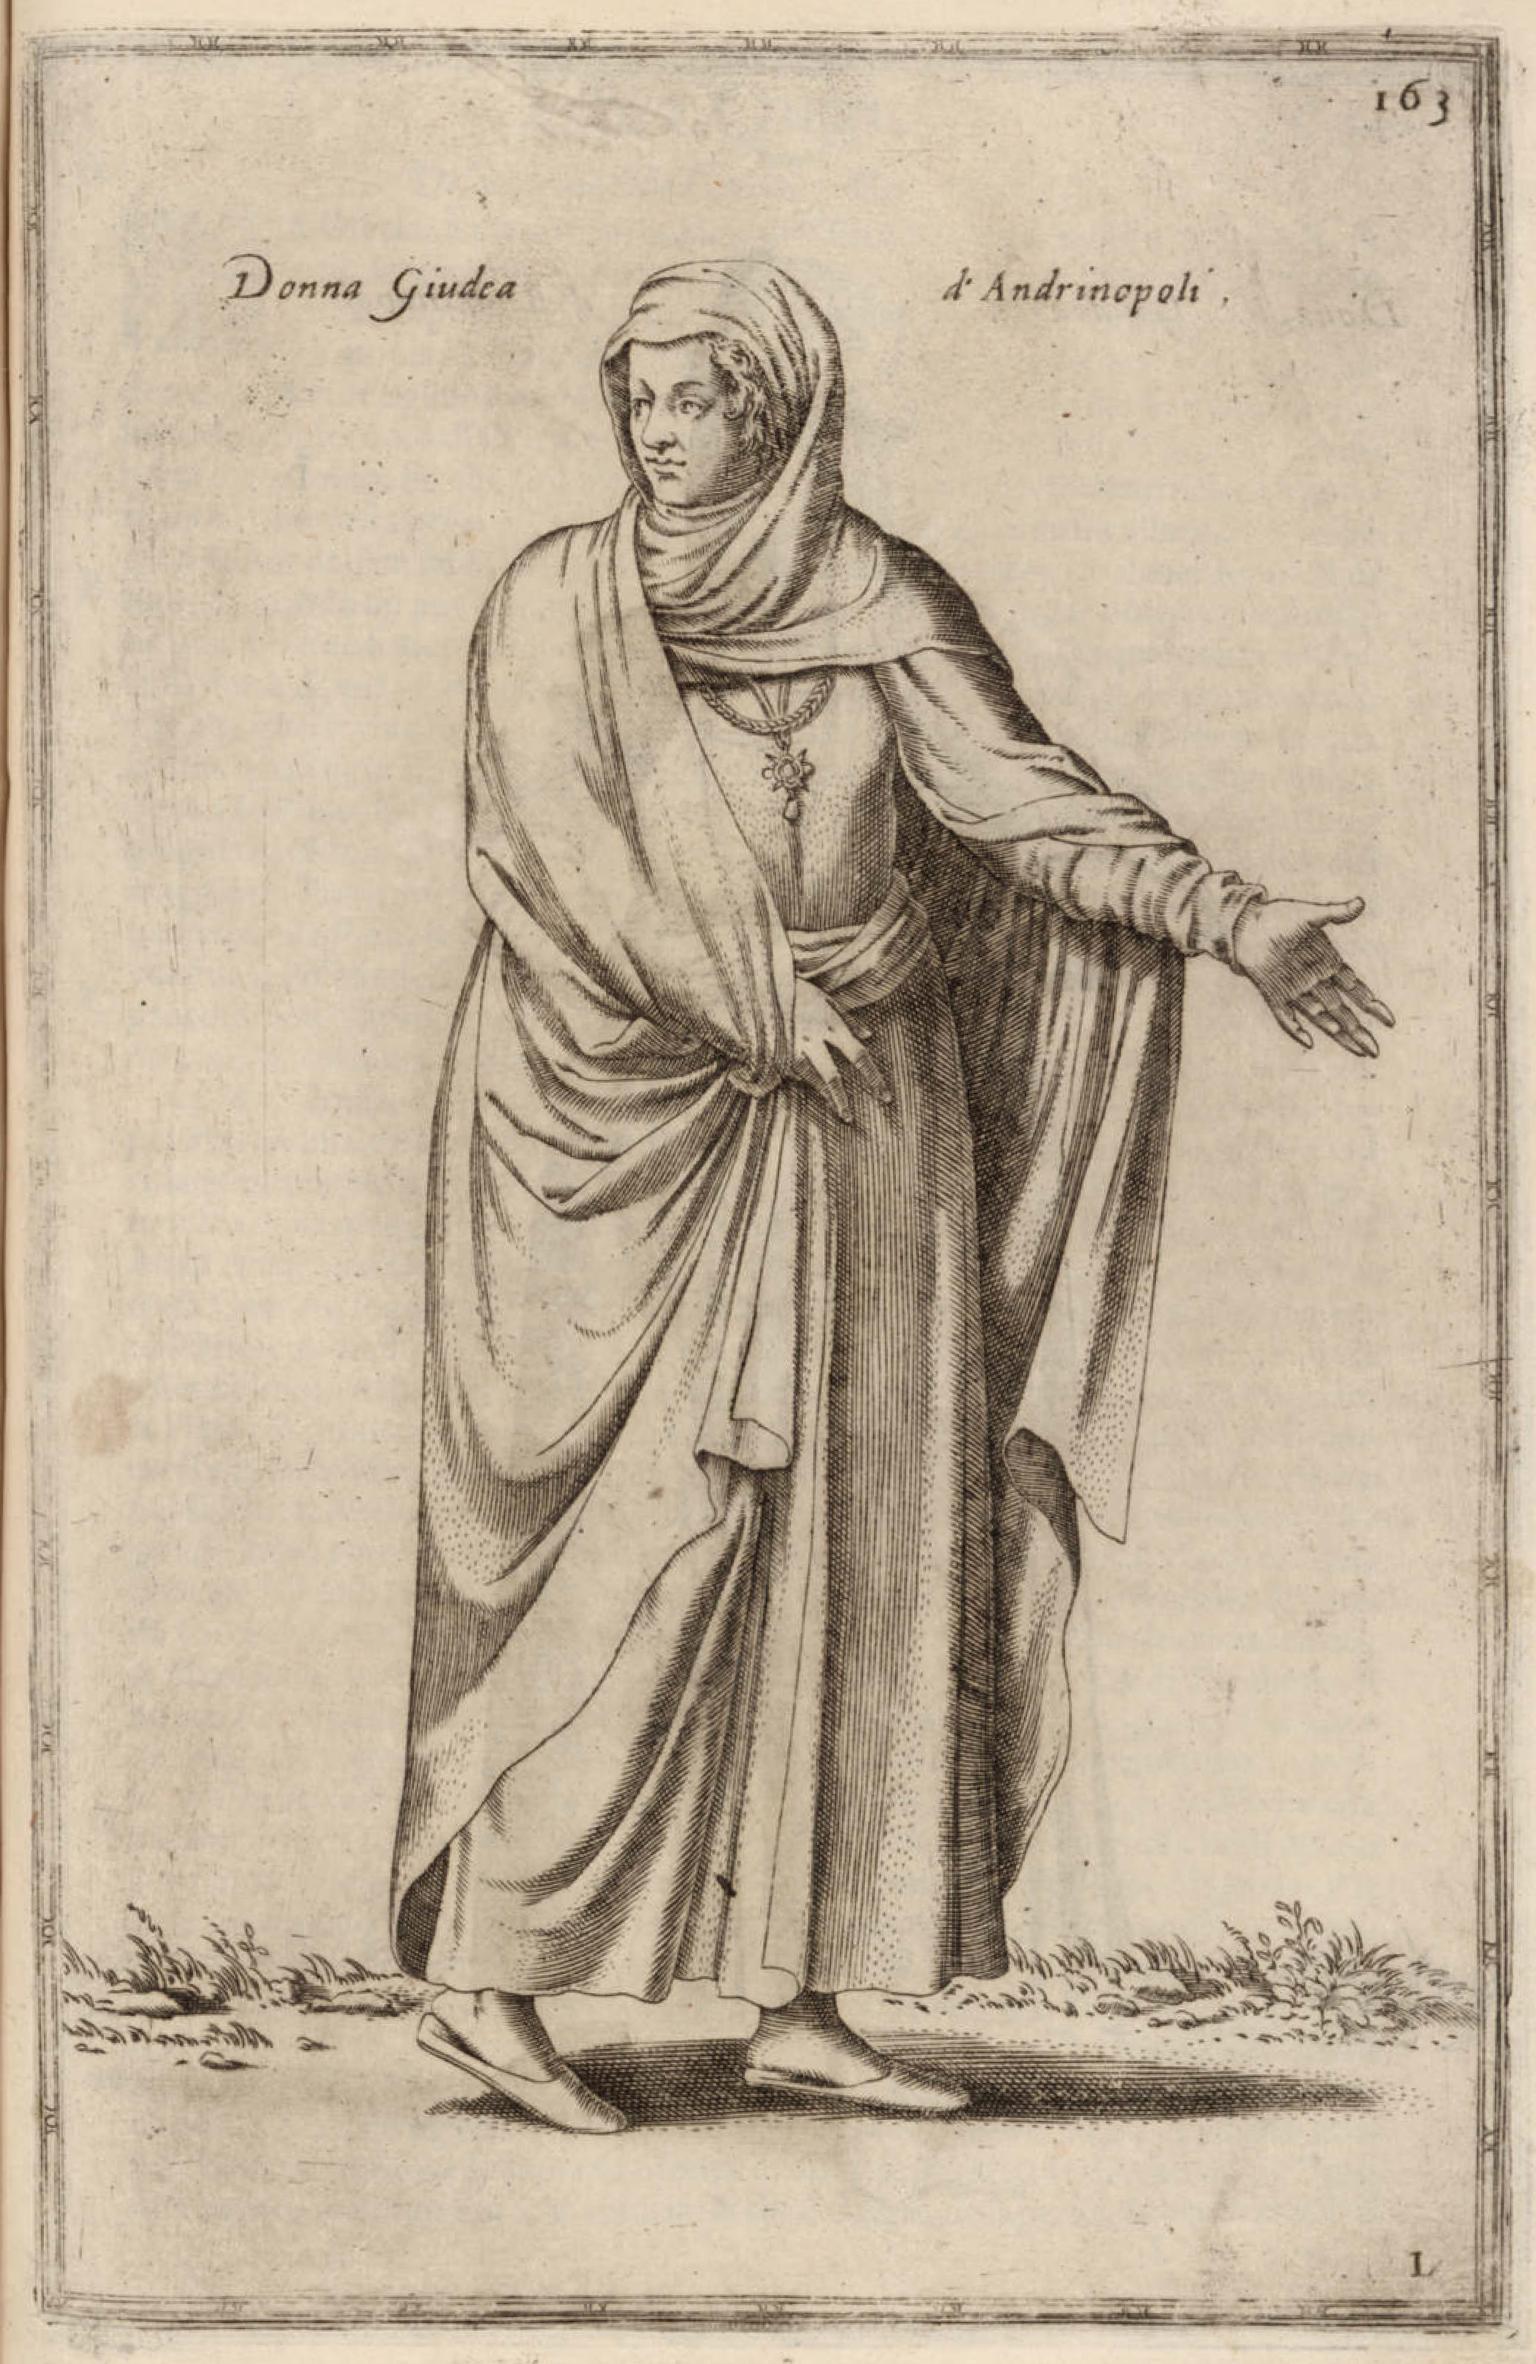 Print of standing woman wearing necklace and robes with head covering and Italian heading.